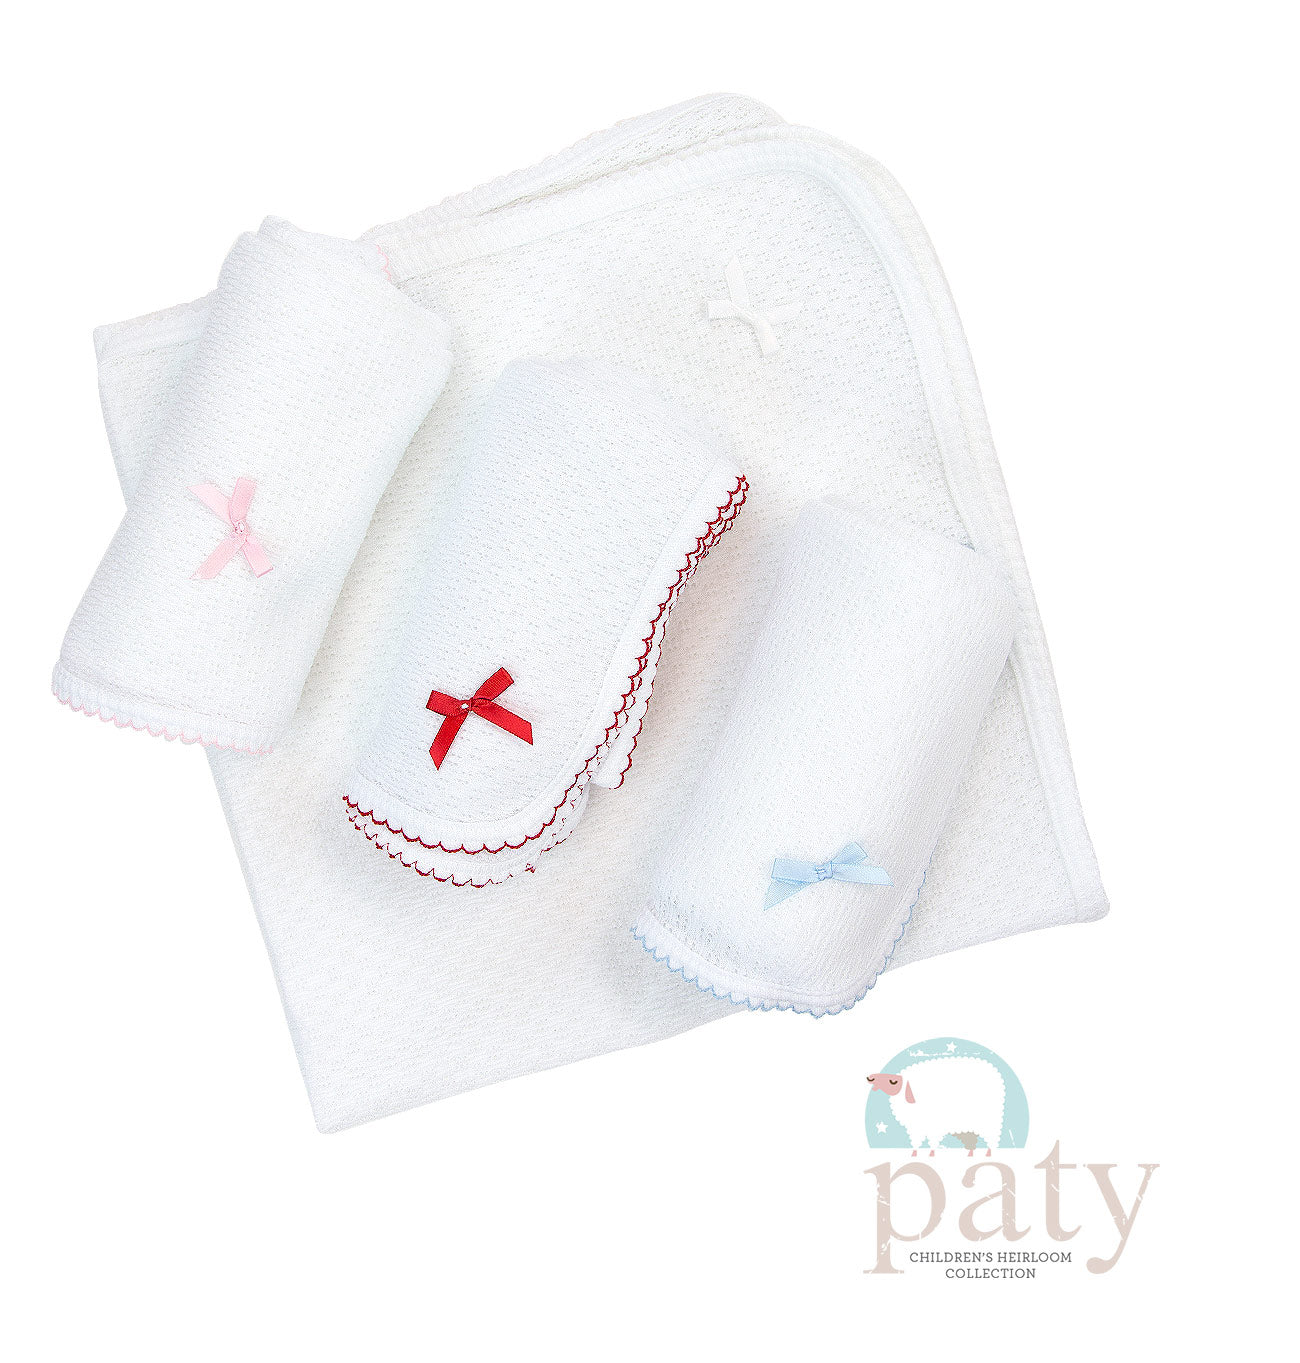 Paty - Receiving Blanket White/Pink Trim & Bow